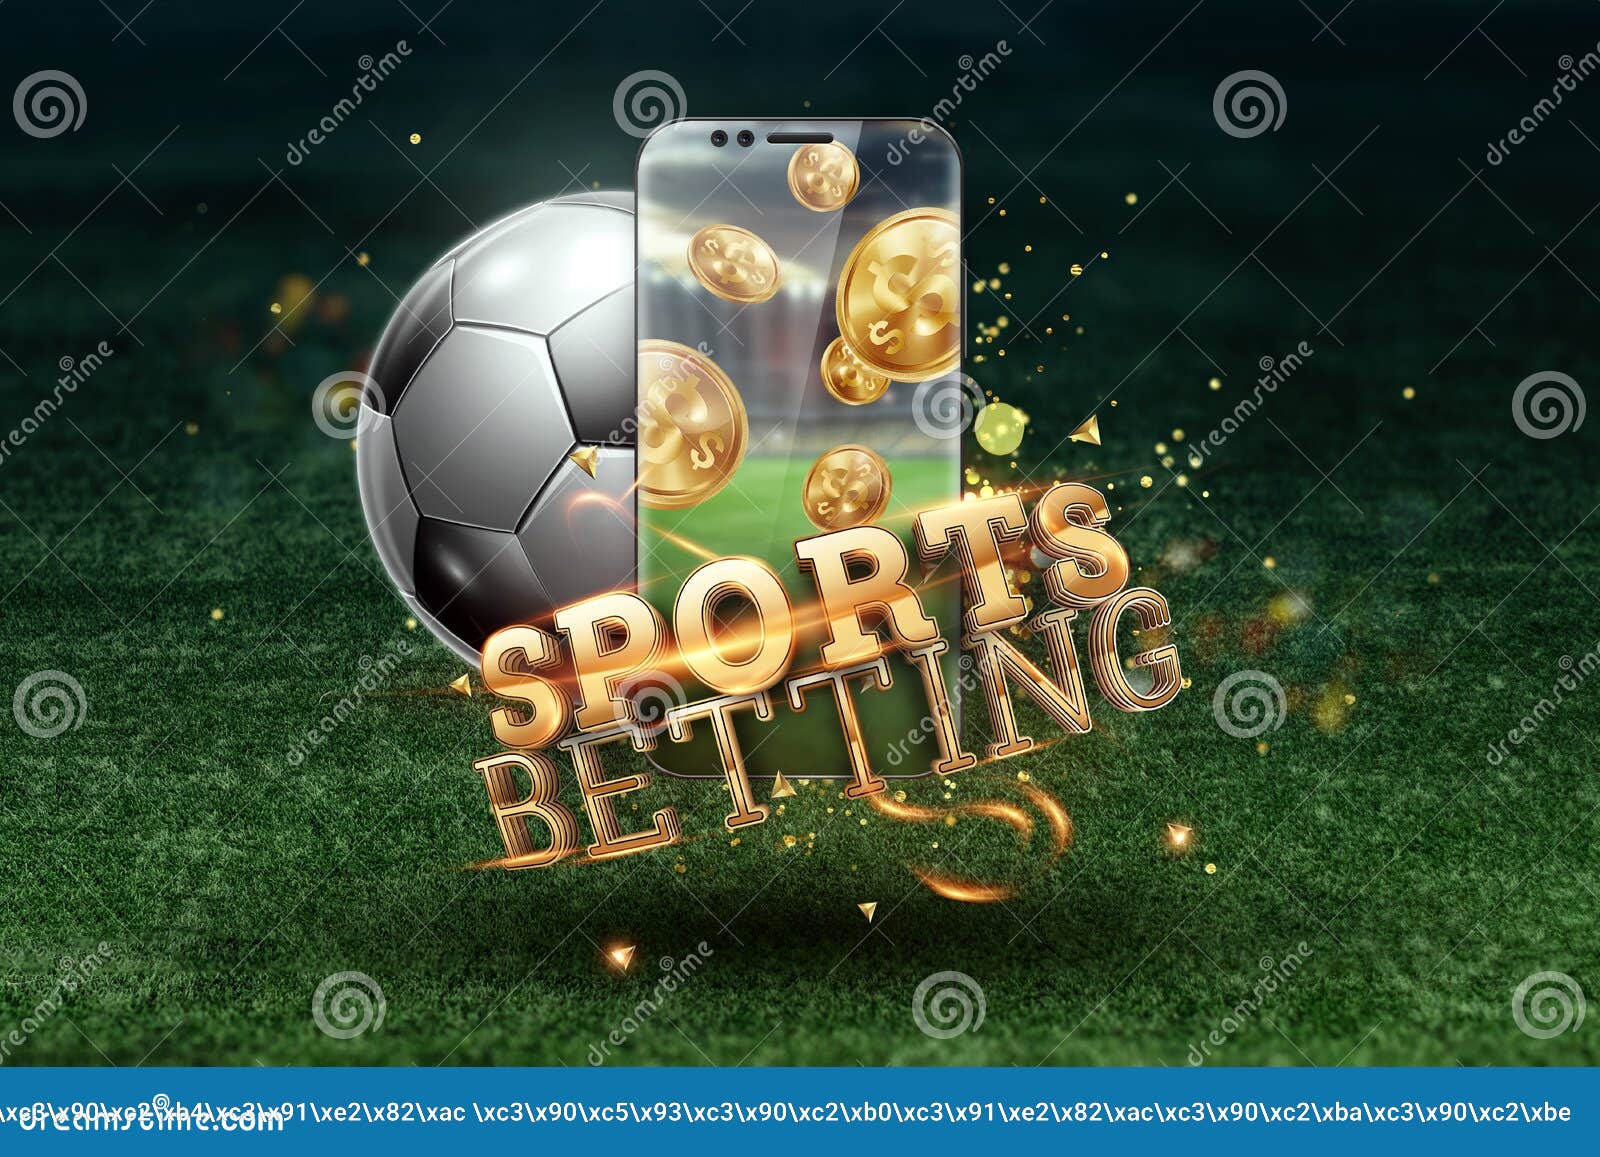 gold inscription sports betting on a smartphone on a background of green grass. bets, sports betting, bookmaker. mixed media